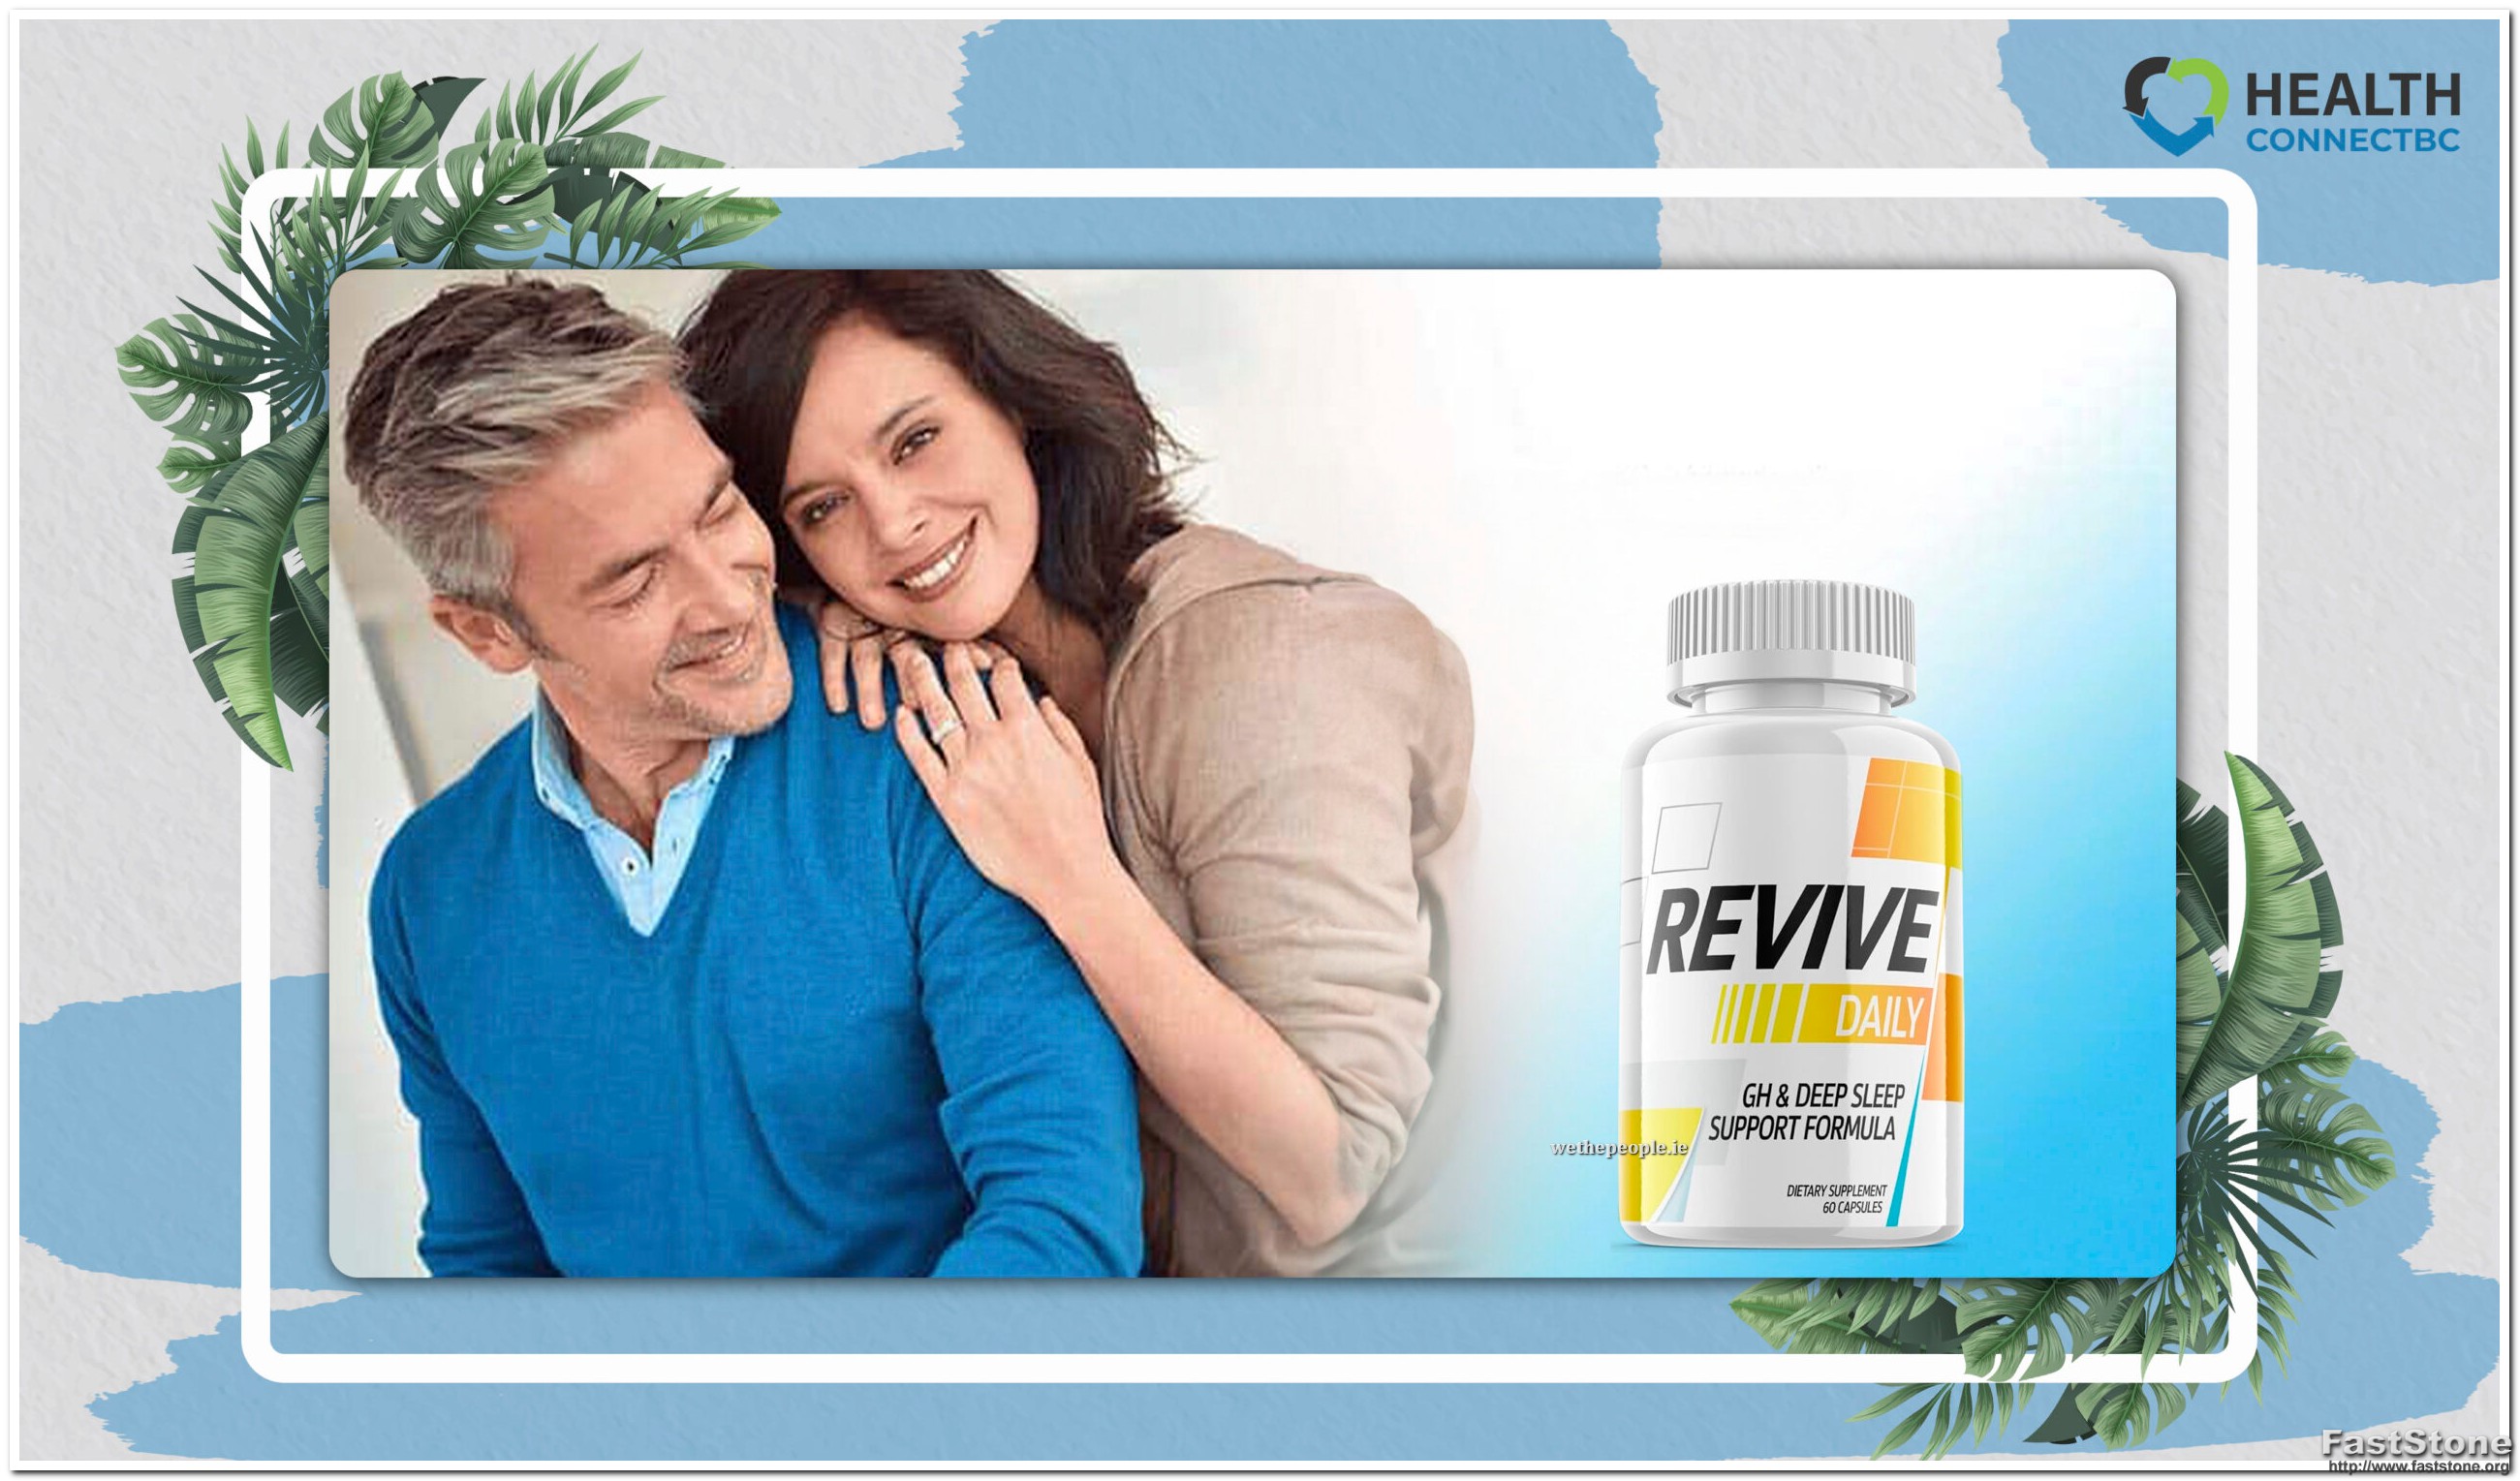 Revive Daily